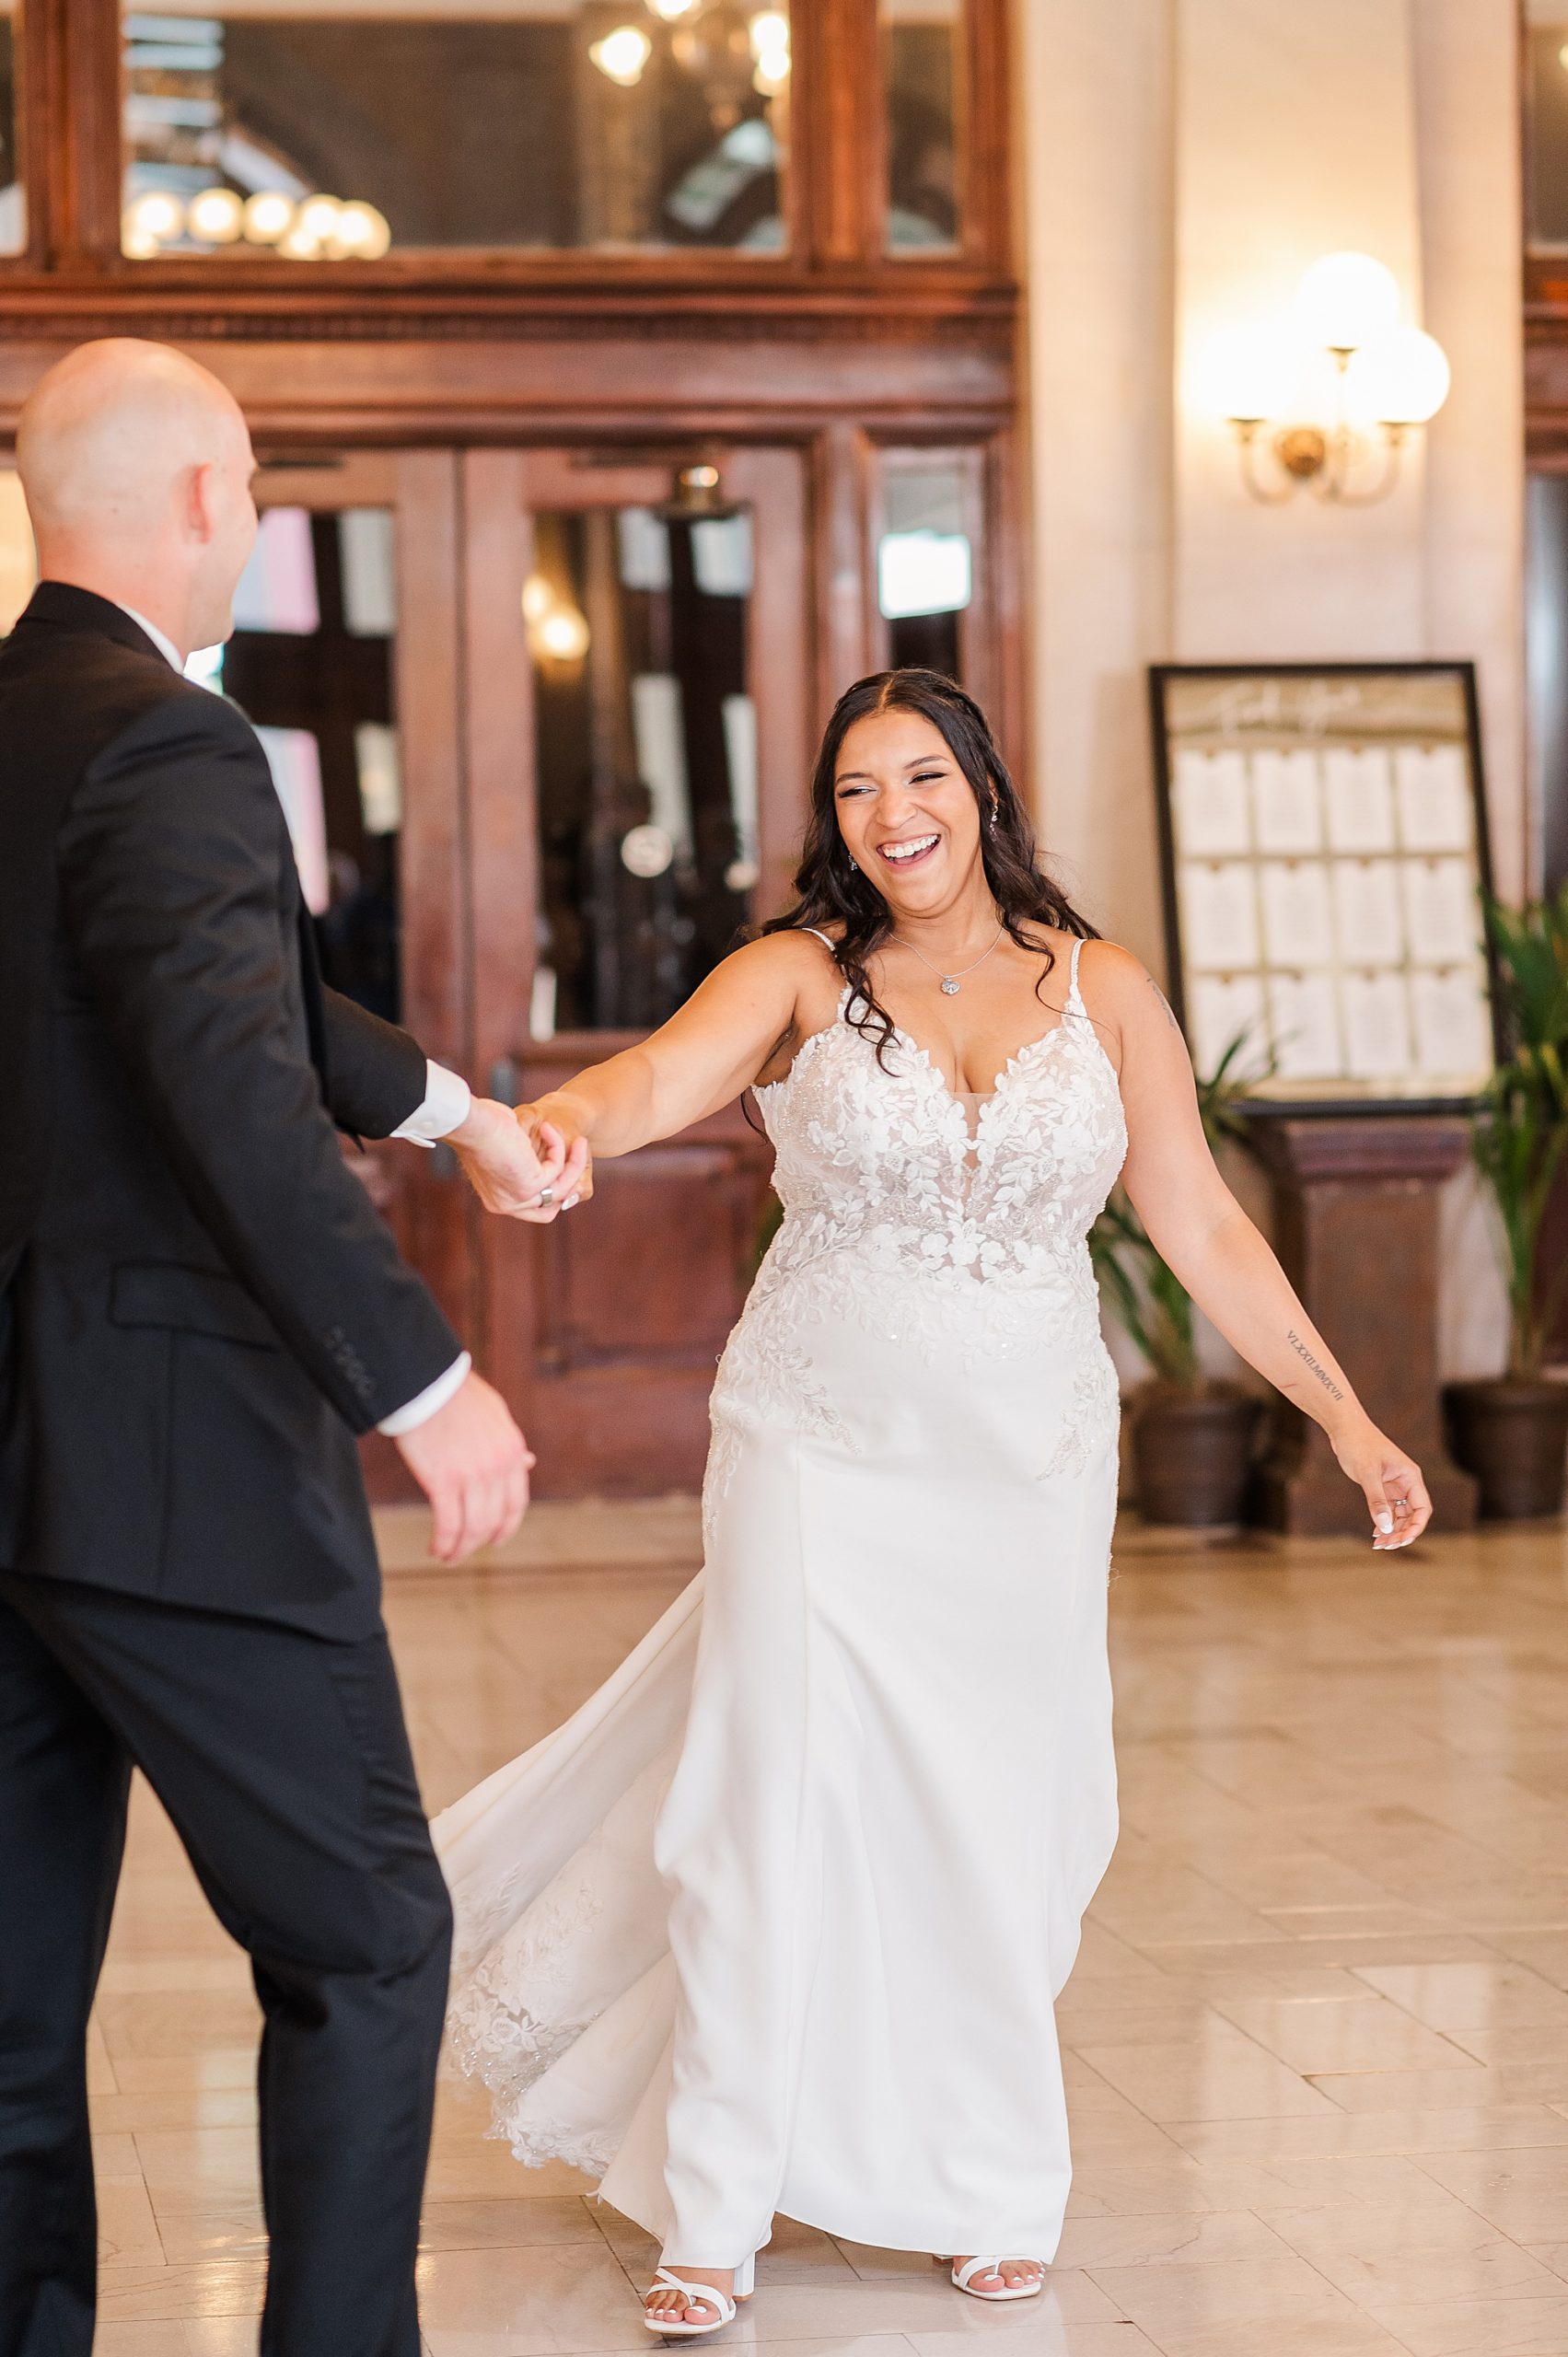 Bride and Groom First Dance at Main Street Station Wedding